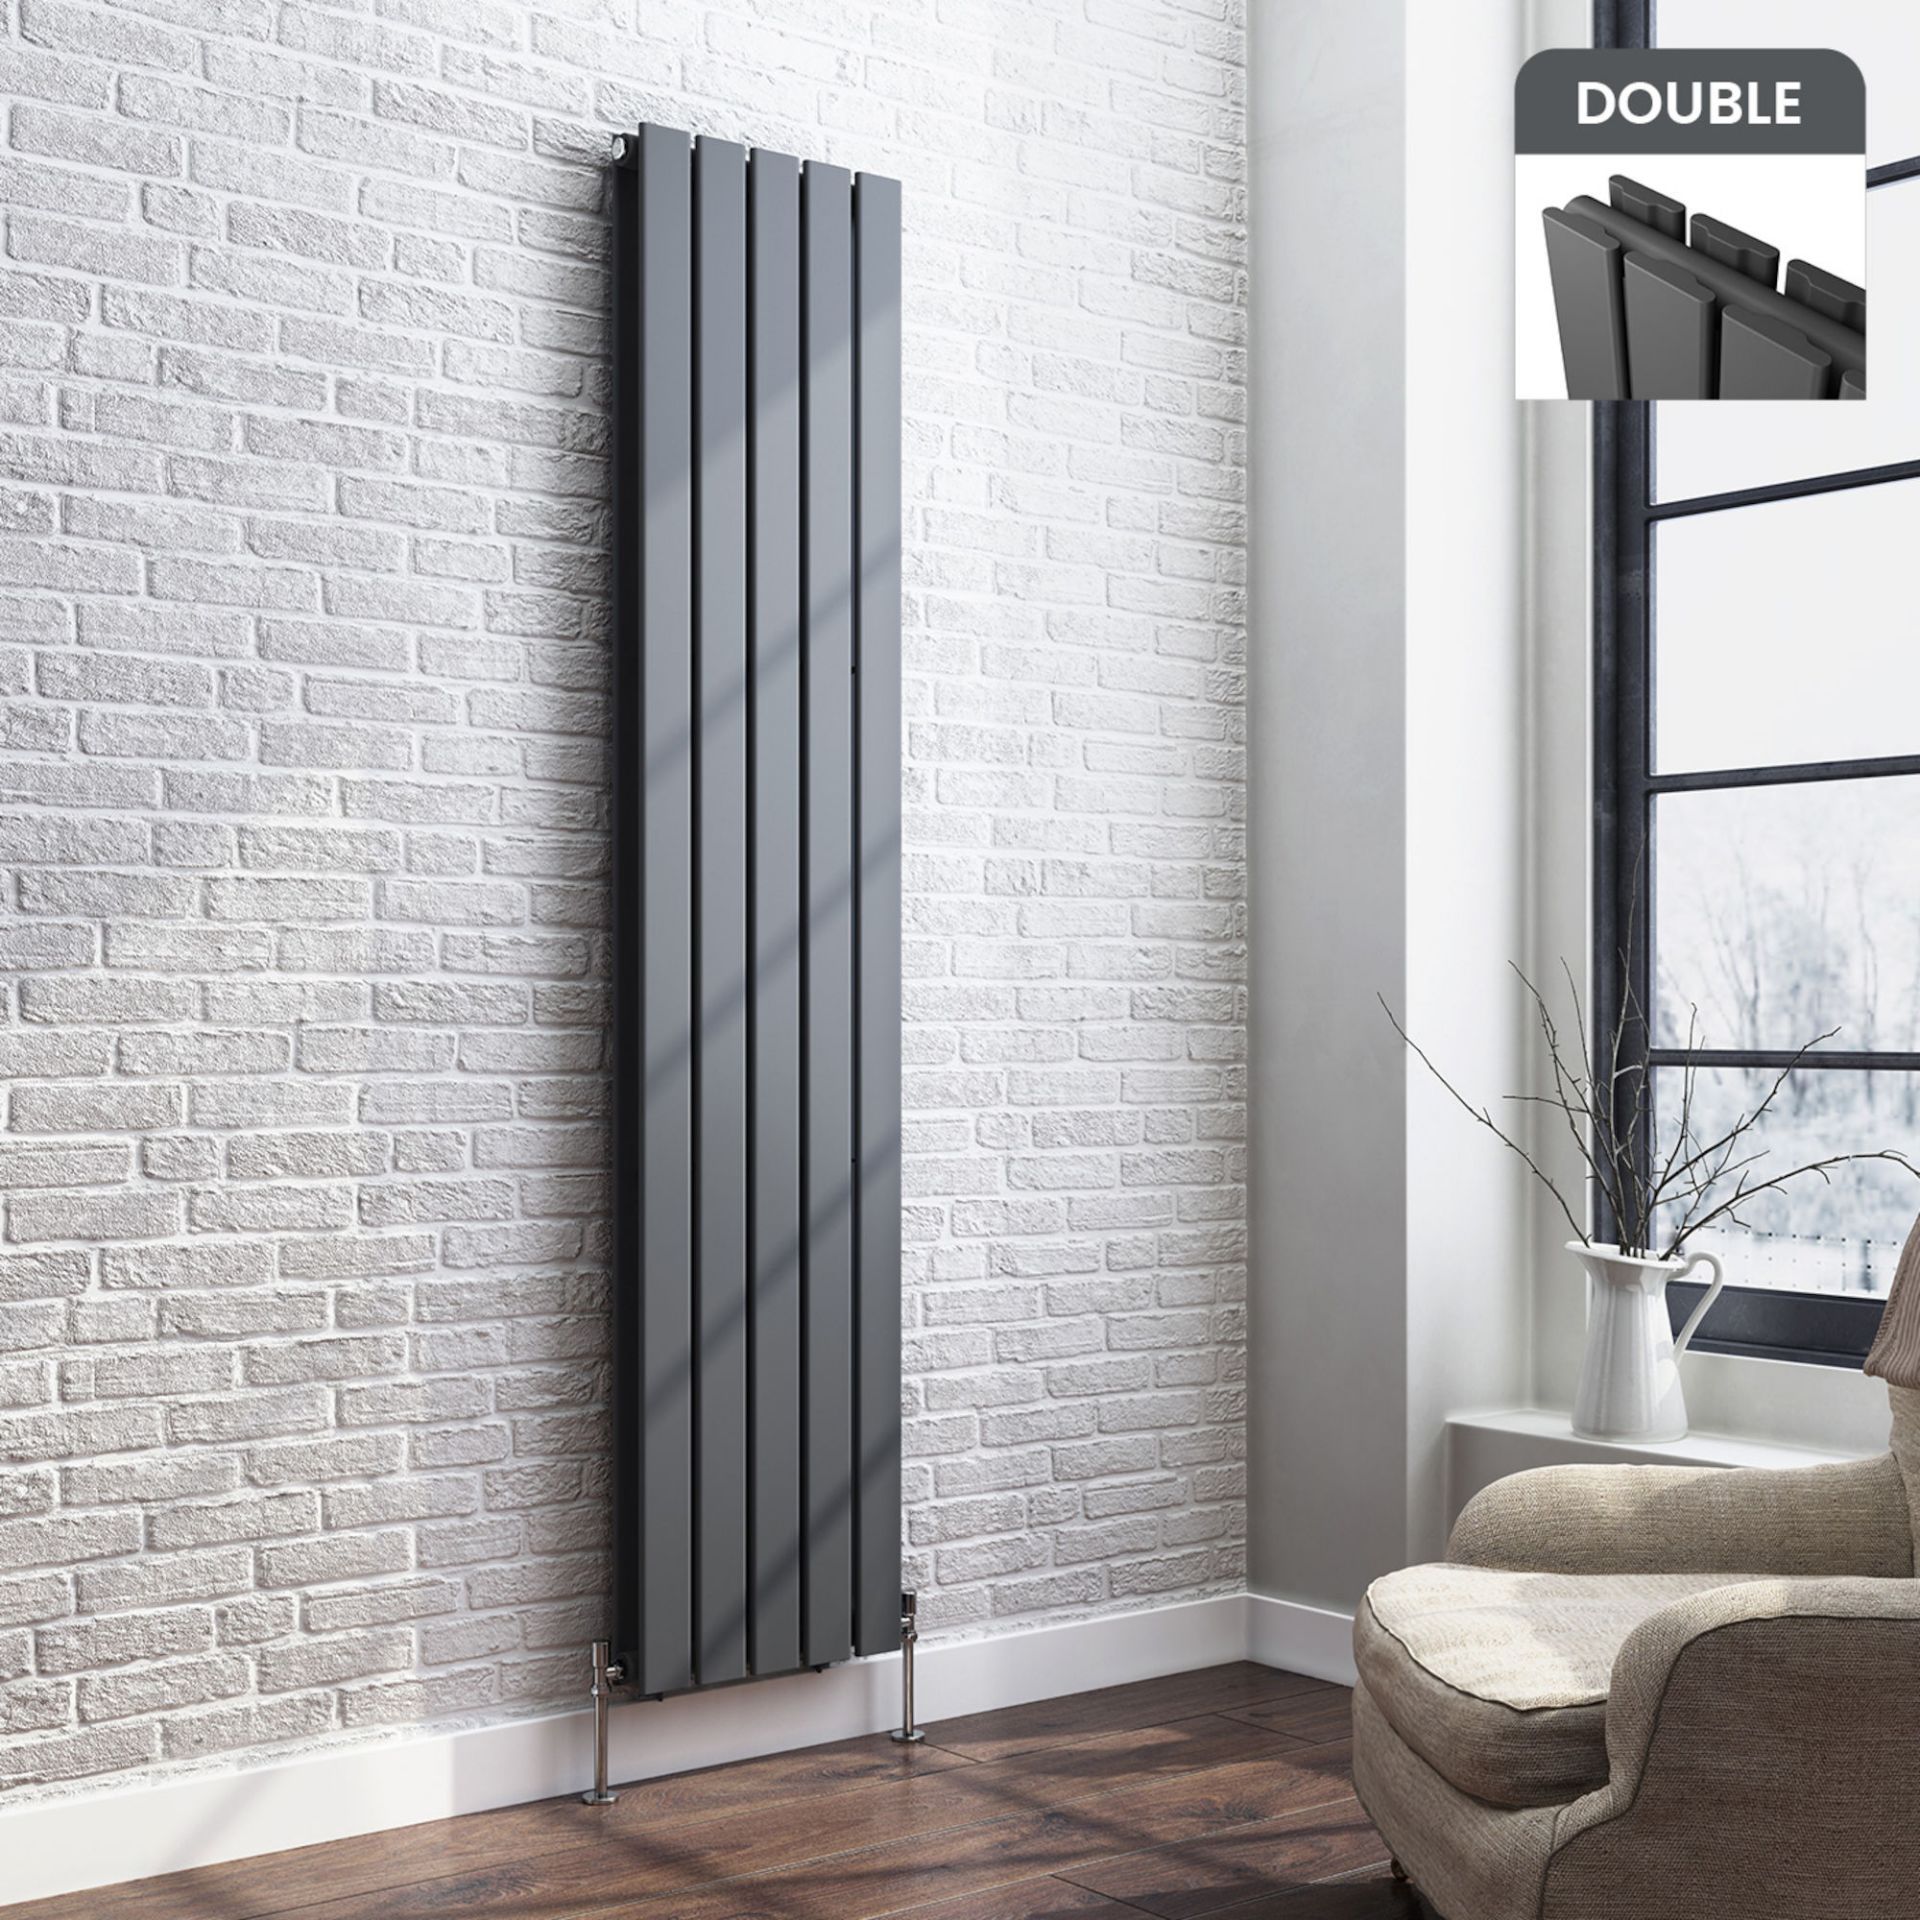 1800x360mm Anthracite Double Flat Panel Vertical Radiator. RRP £449.99. Made with low carbon